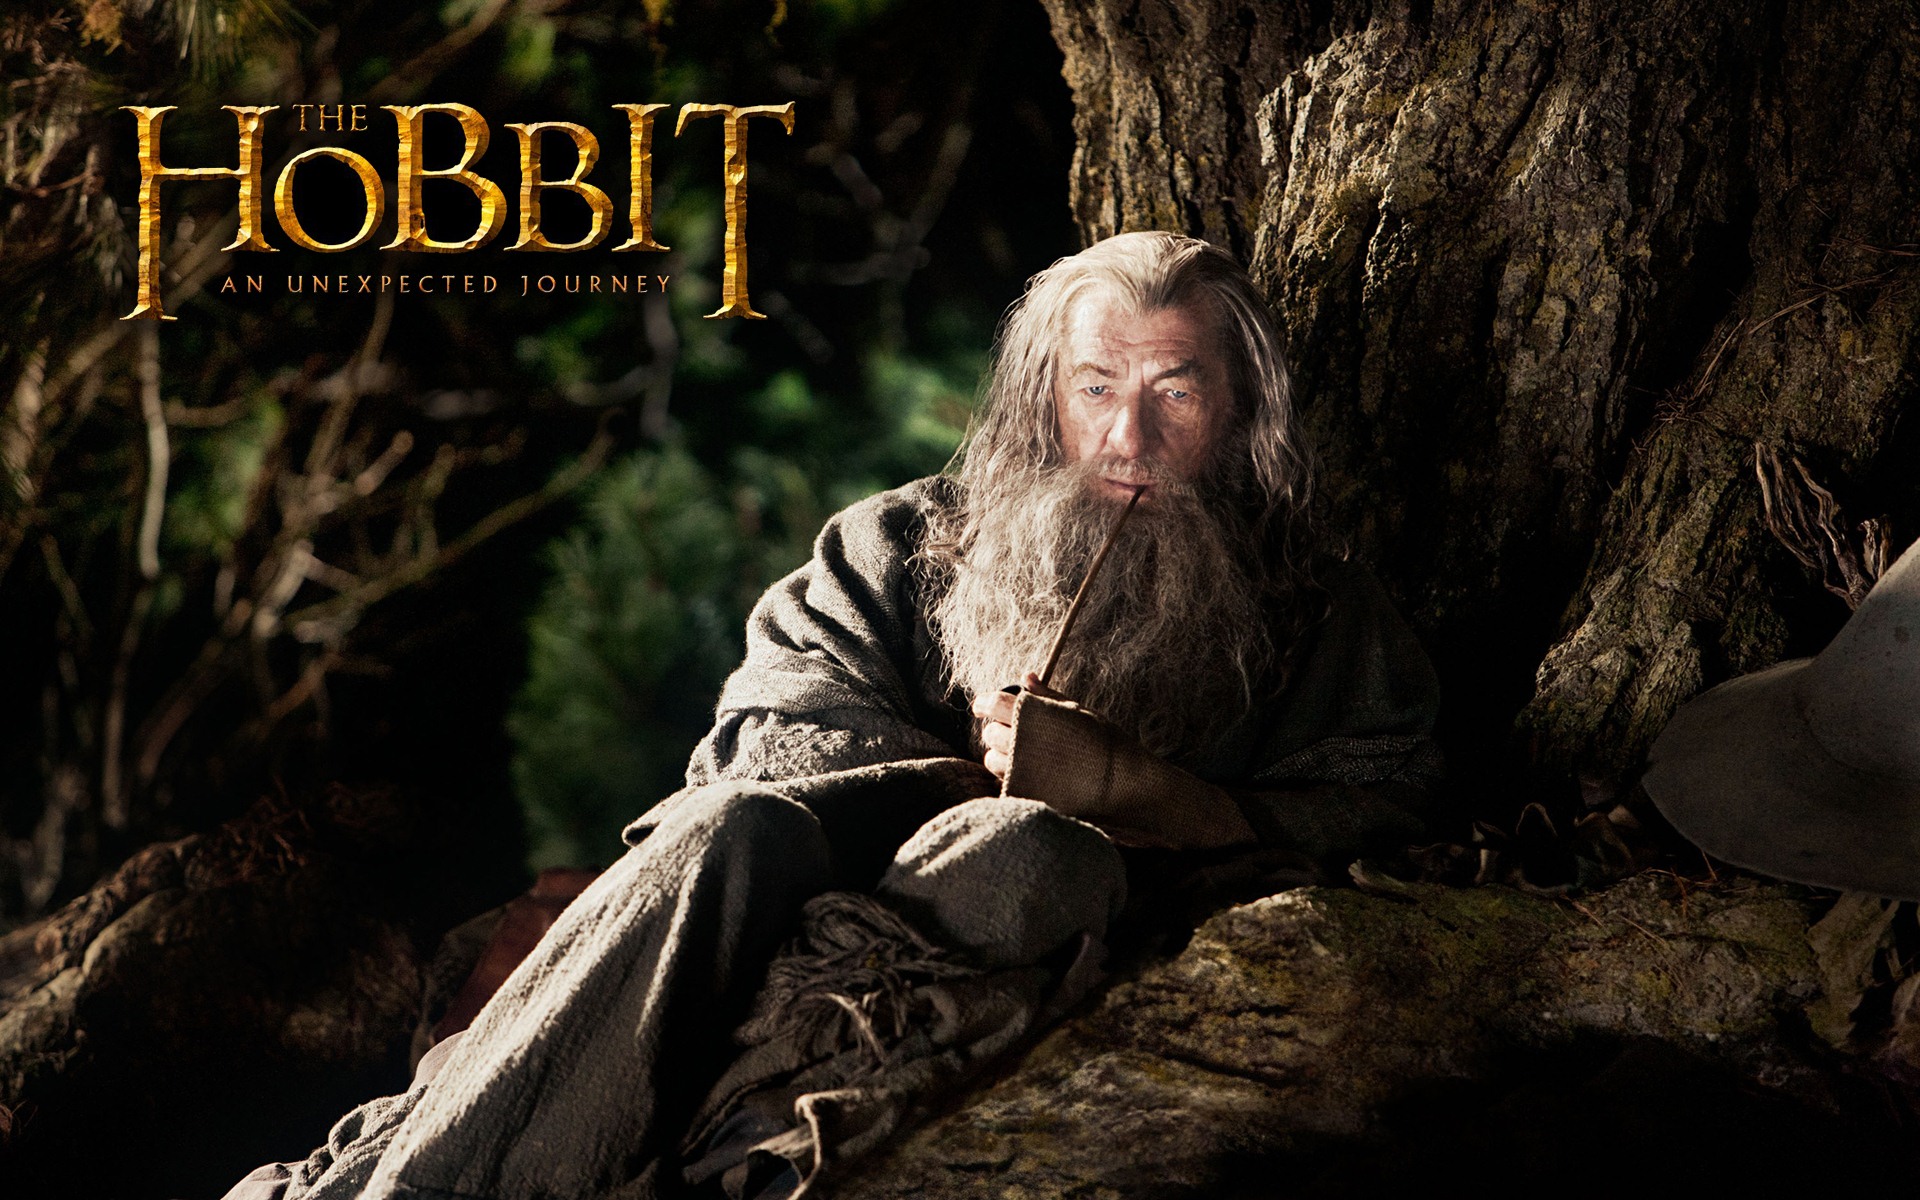 The Hobbit: An Unexpected Journey HD wallpapers #10 - 1920x1200